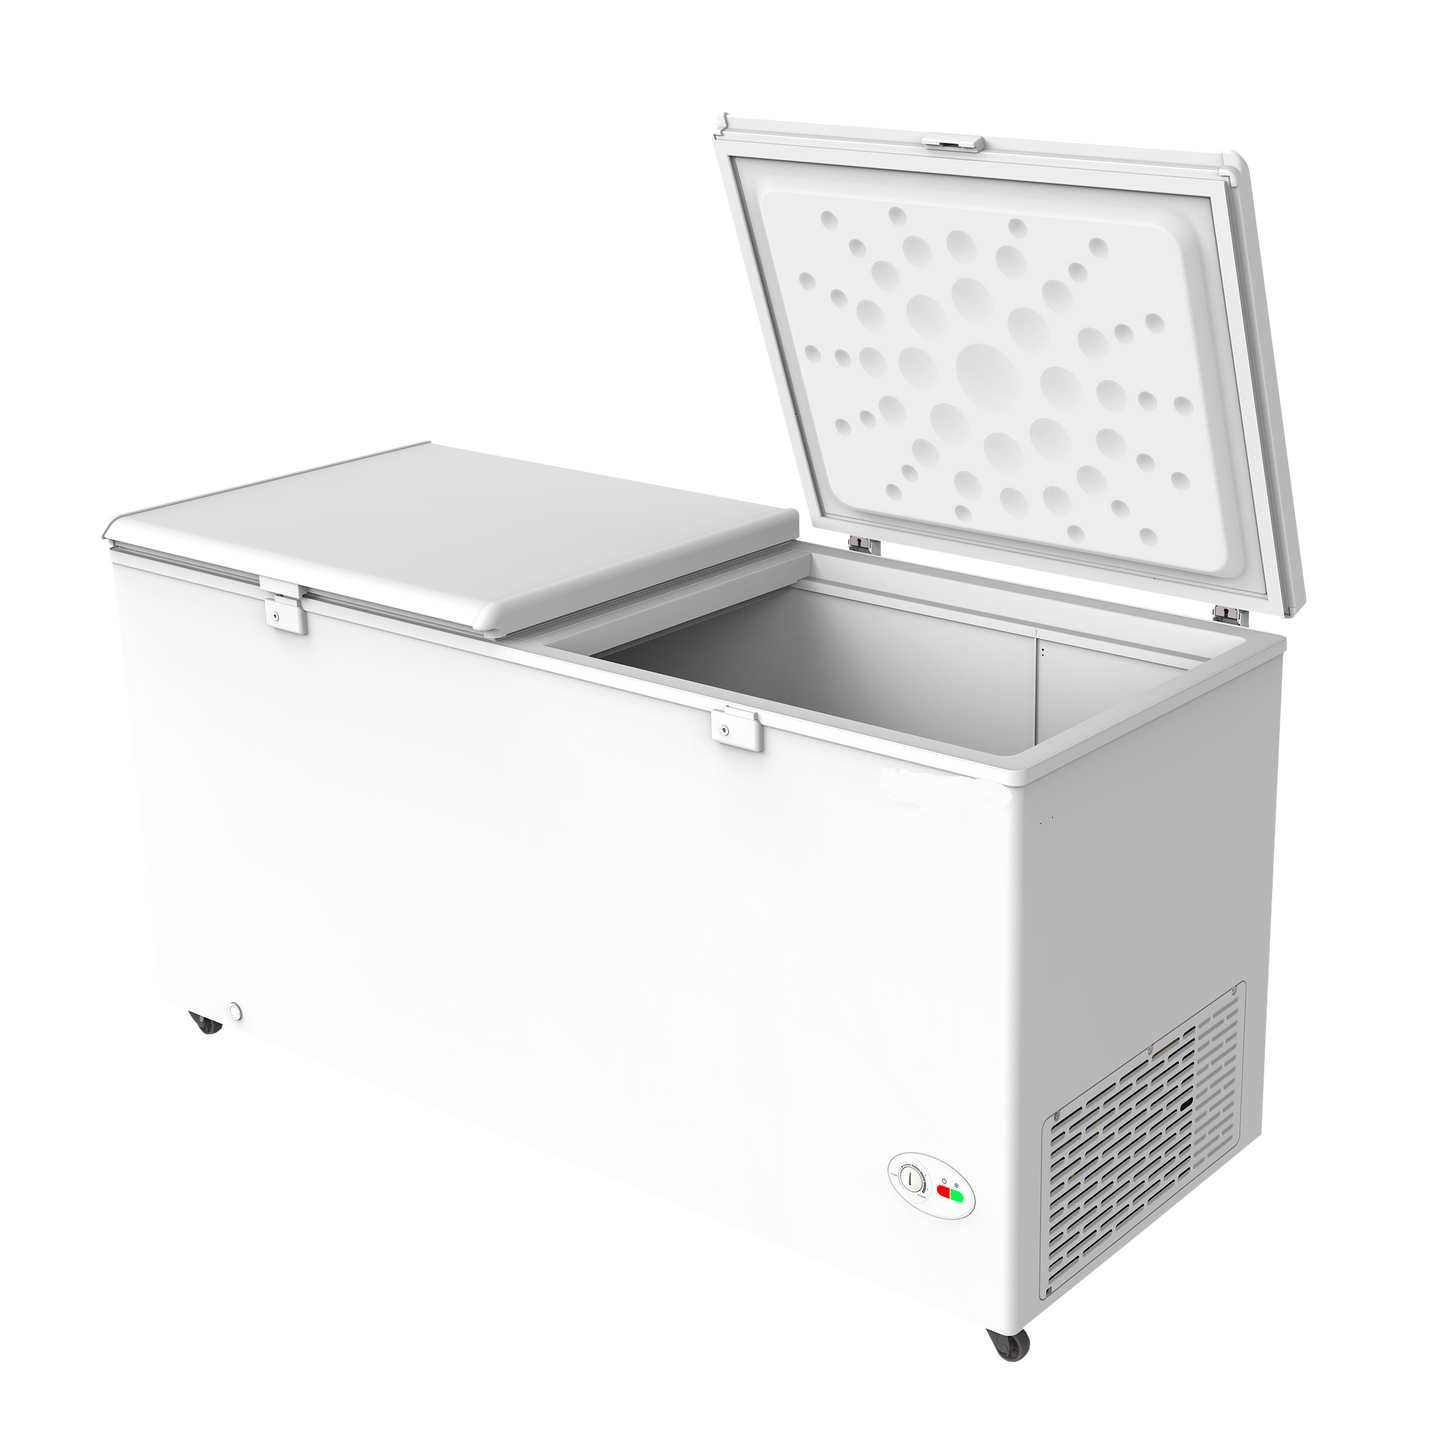 Emtex 515 Litres Double Door Chest Freezer (Direct Cooling Technology, CF575NEYW, White)